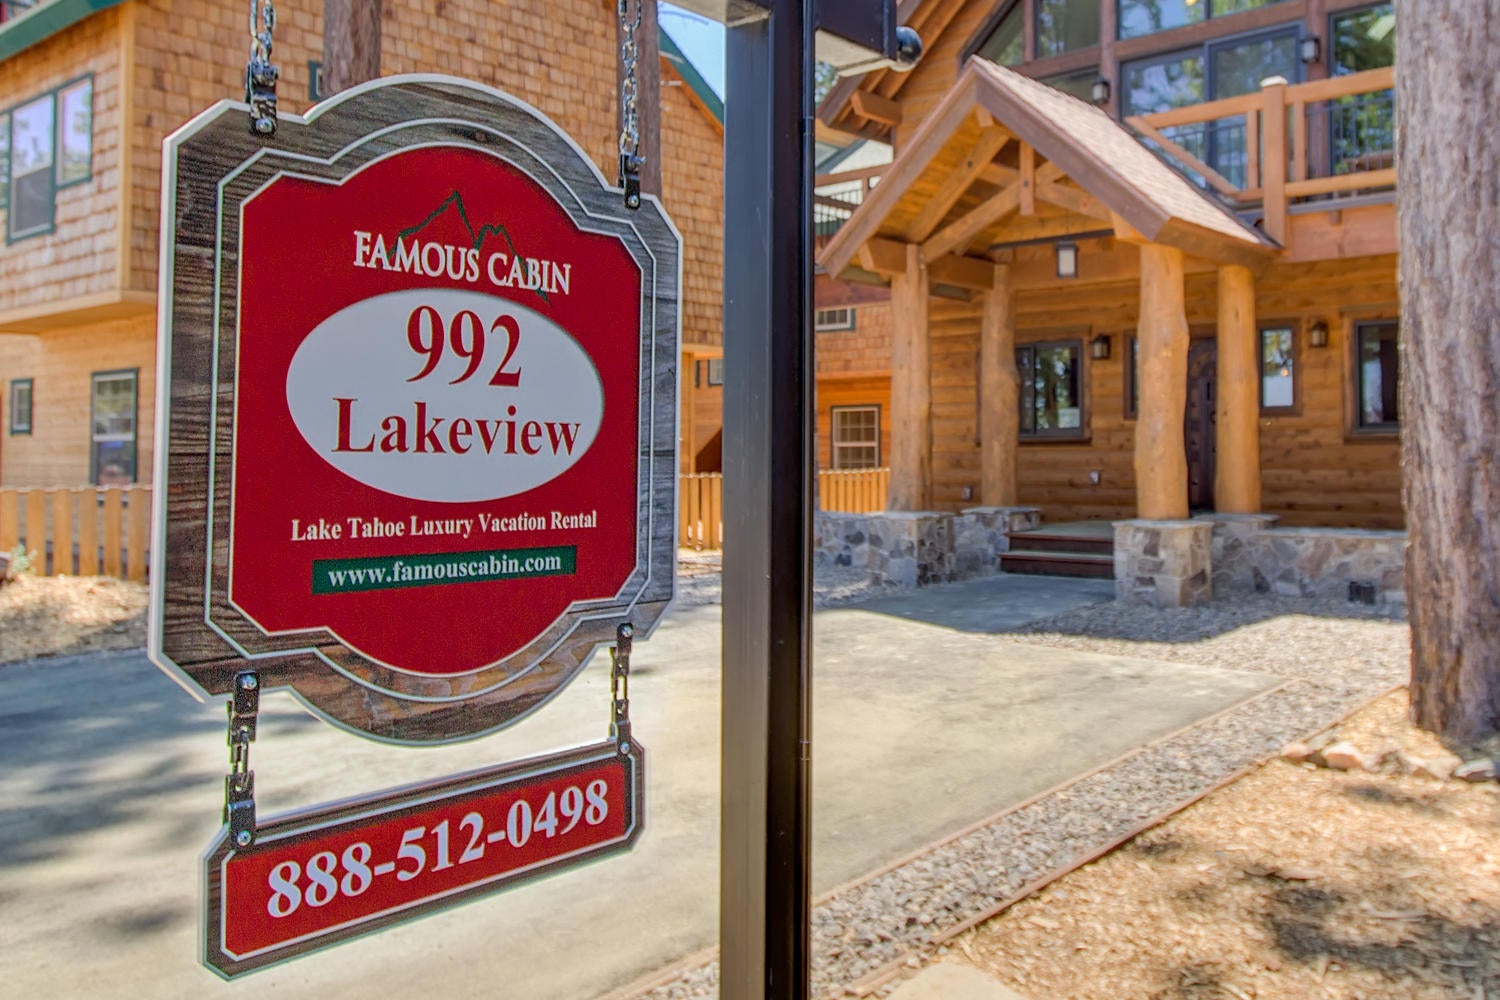 Famous Cabin Lake Tahoe Luxury Vacation Rental, 992 Lakeview Ave